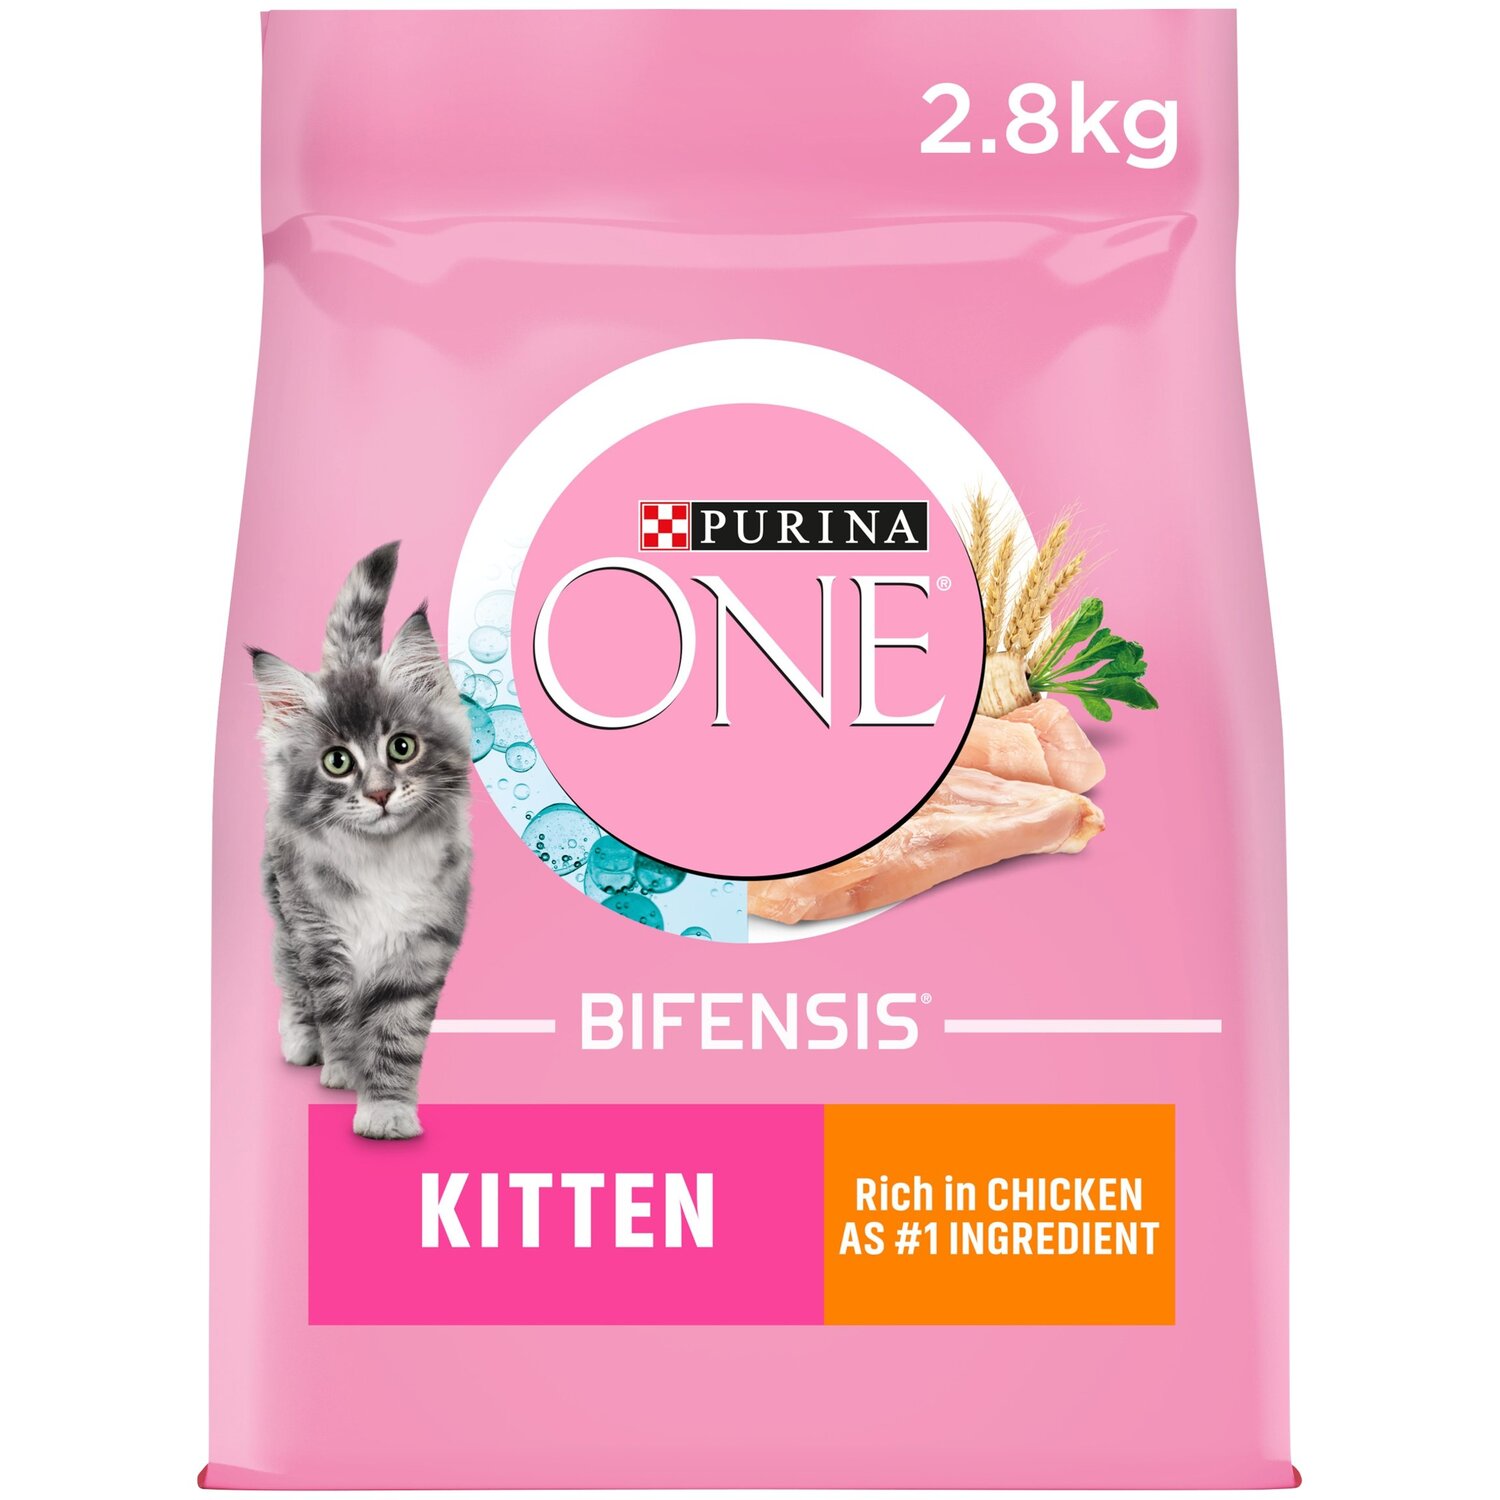 Purina One Chicken and Wholegrain Dry Kitten Food 2.8kg Image 1